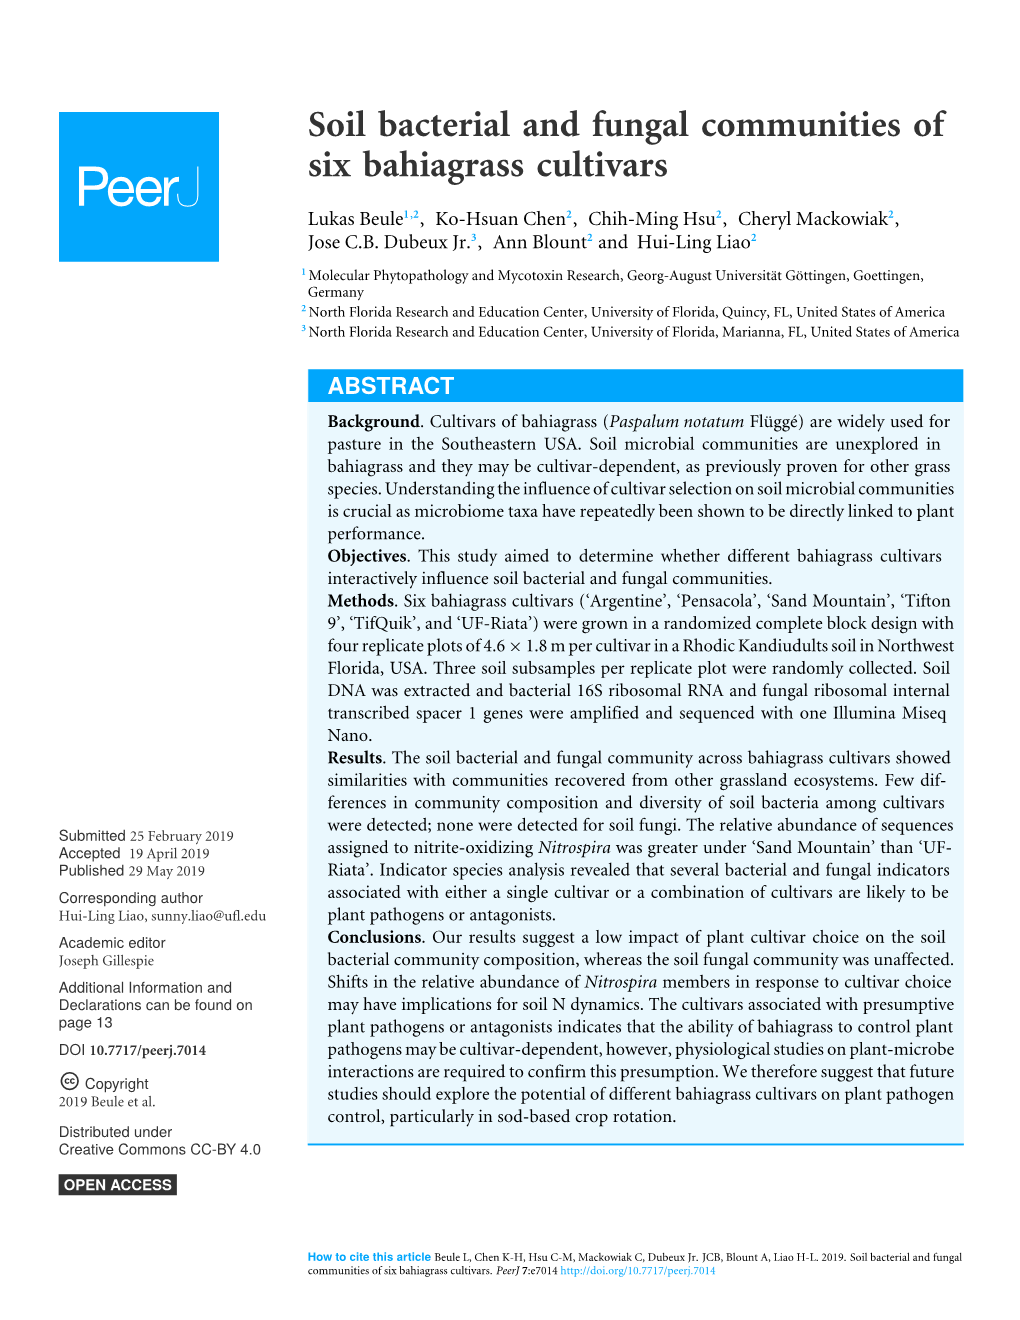 Soil Bacterial and Fungal Communities of Six Bahiagrass Cultivars